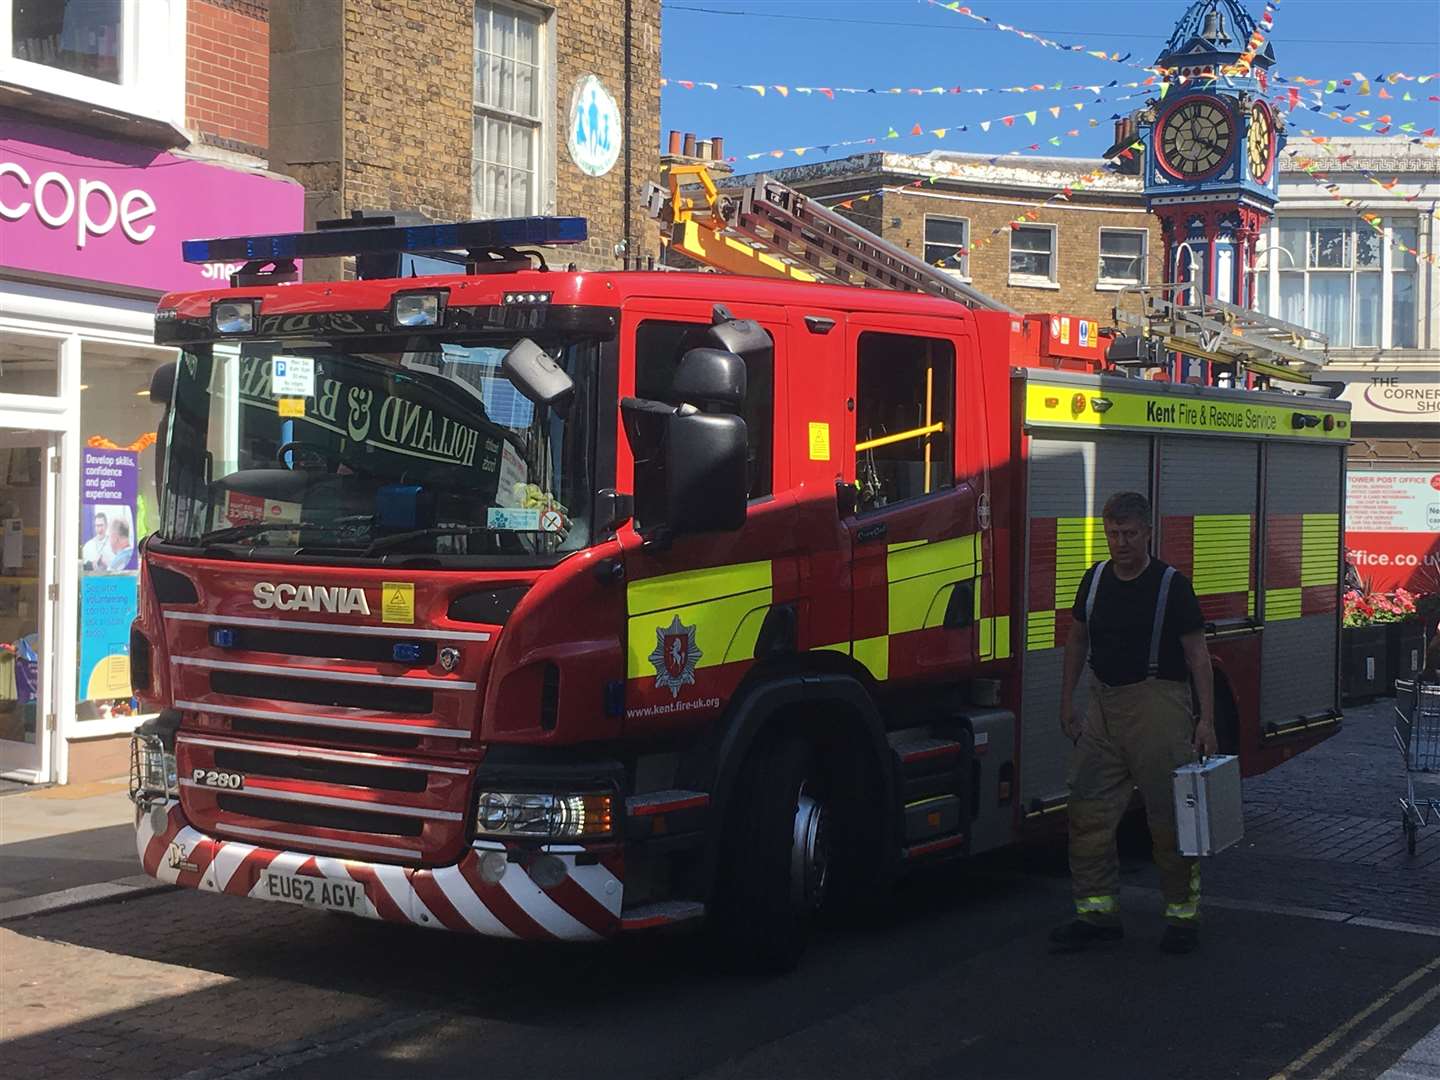 A fire engine in Sheerness High Street